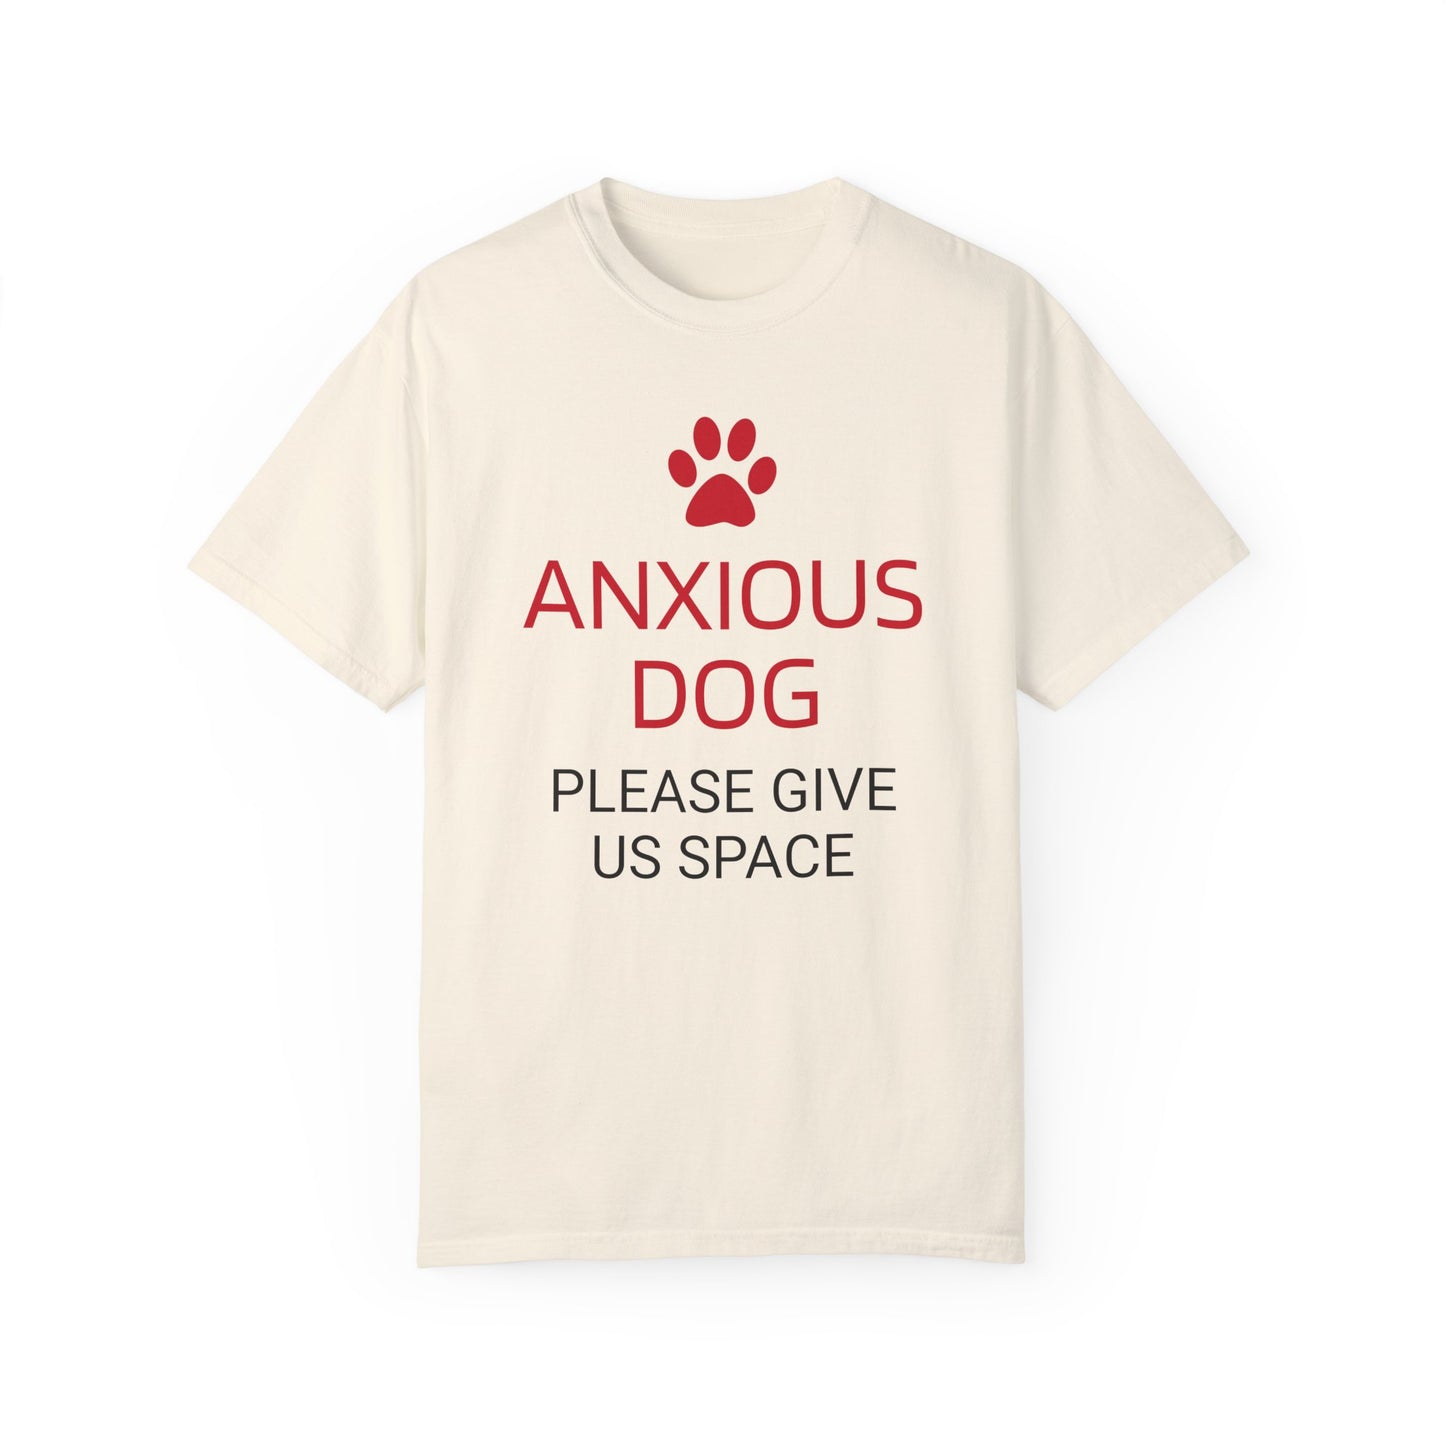 "Anxious Dog: Please Give Us Space" T-Shirt